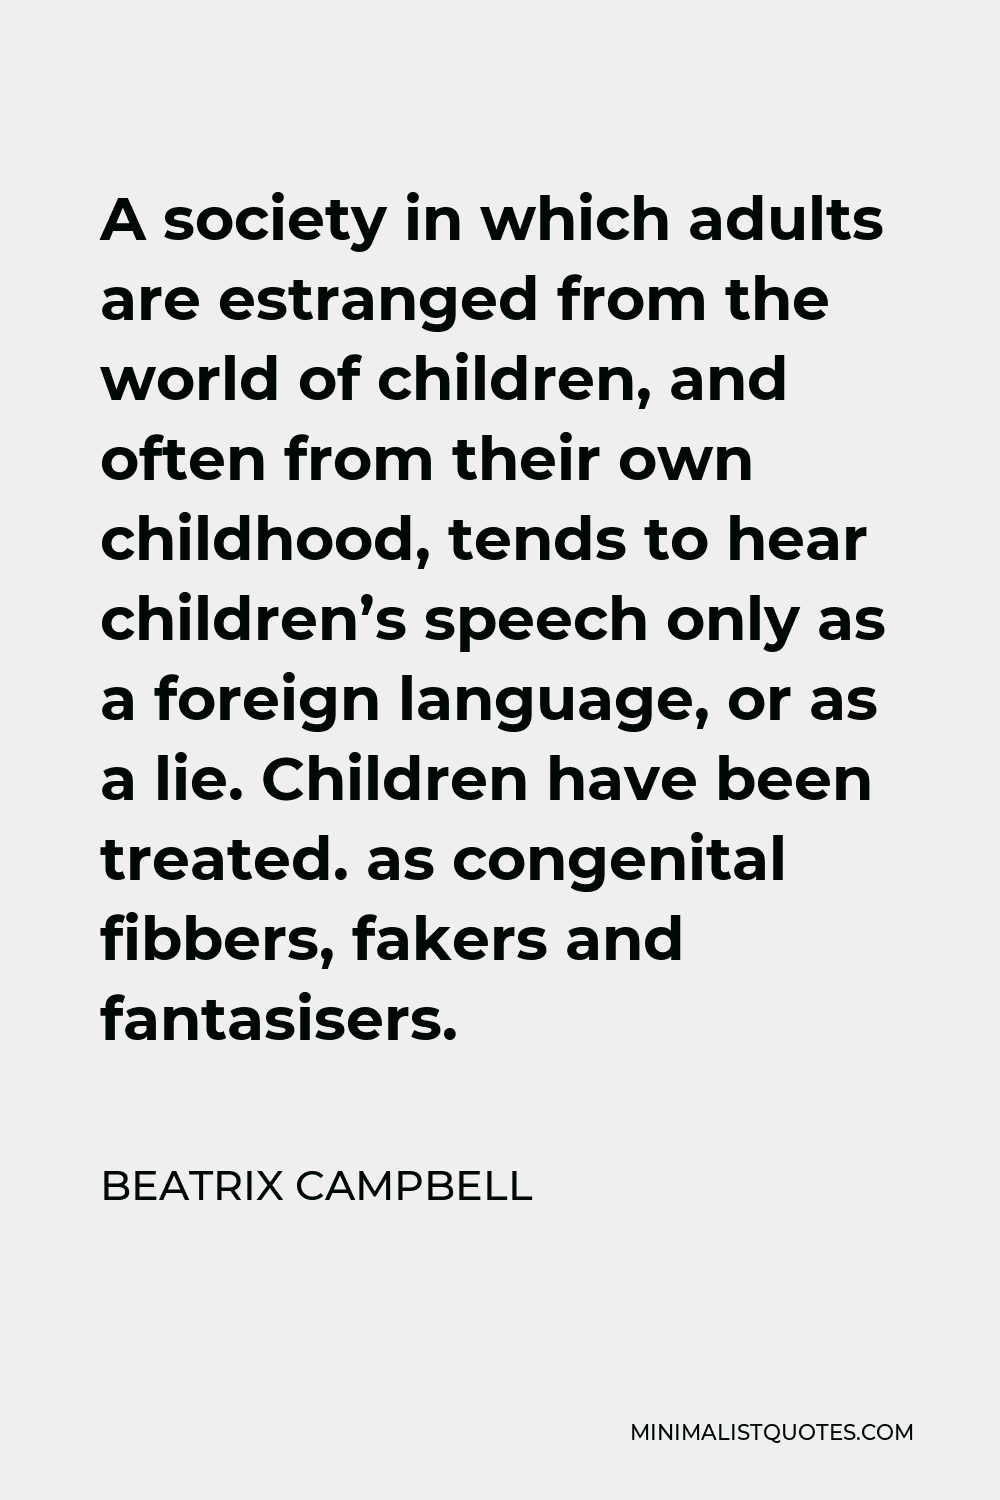 Beatrix Campbell Quote - A society in which adults are estranged from the world of children, and often from their own childhood, tends to hear children’s speech only as a foreign language, or as a lie. Children have been treated. as congenital fibbers, fakers and fantasisers.